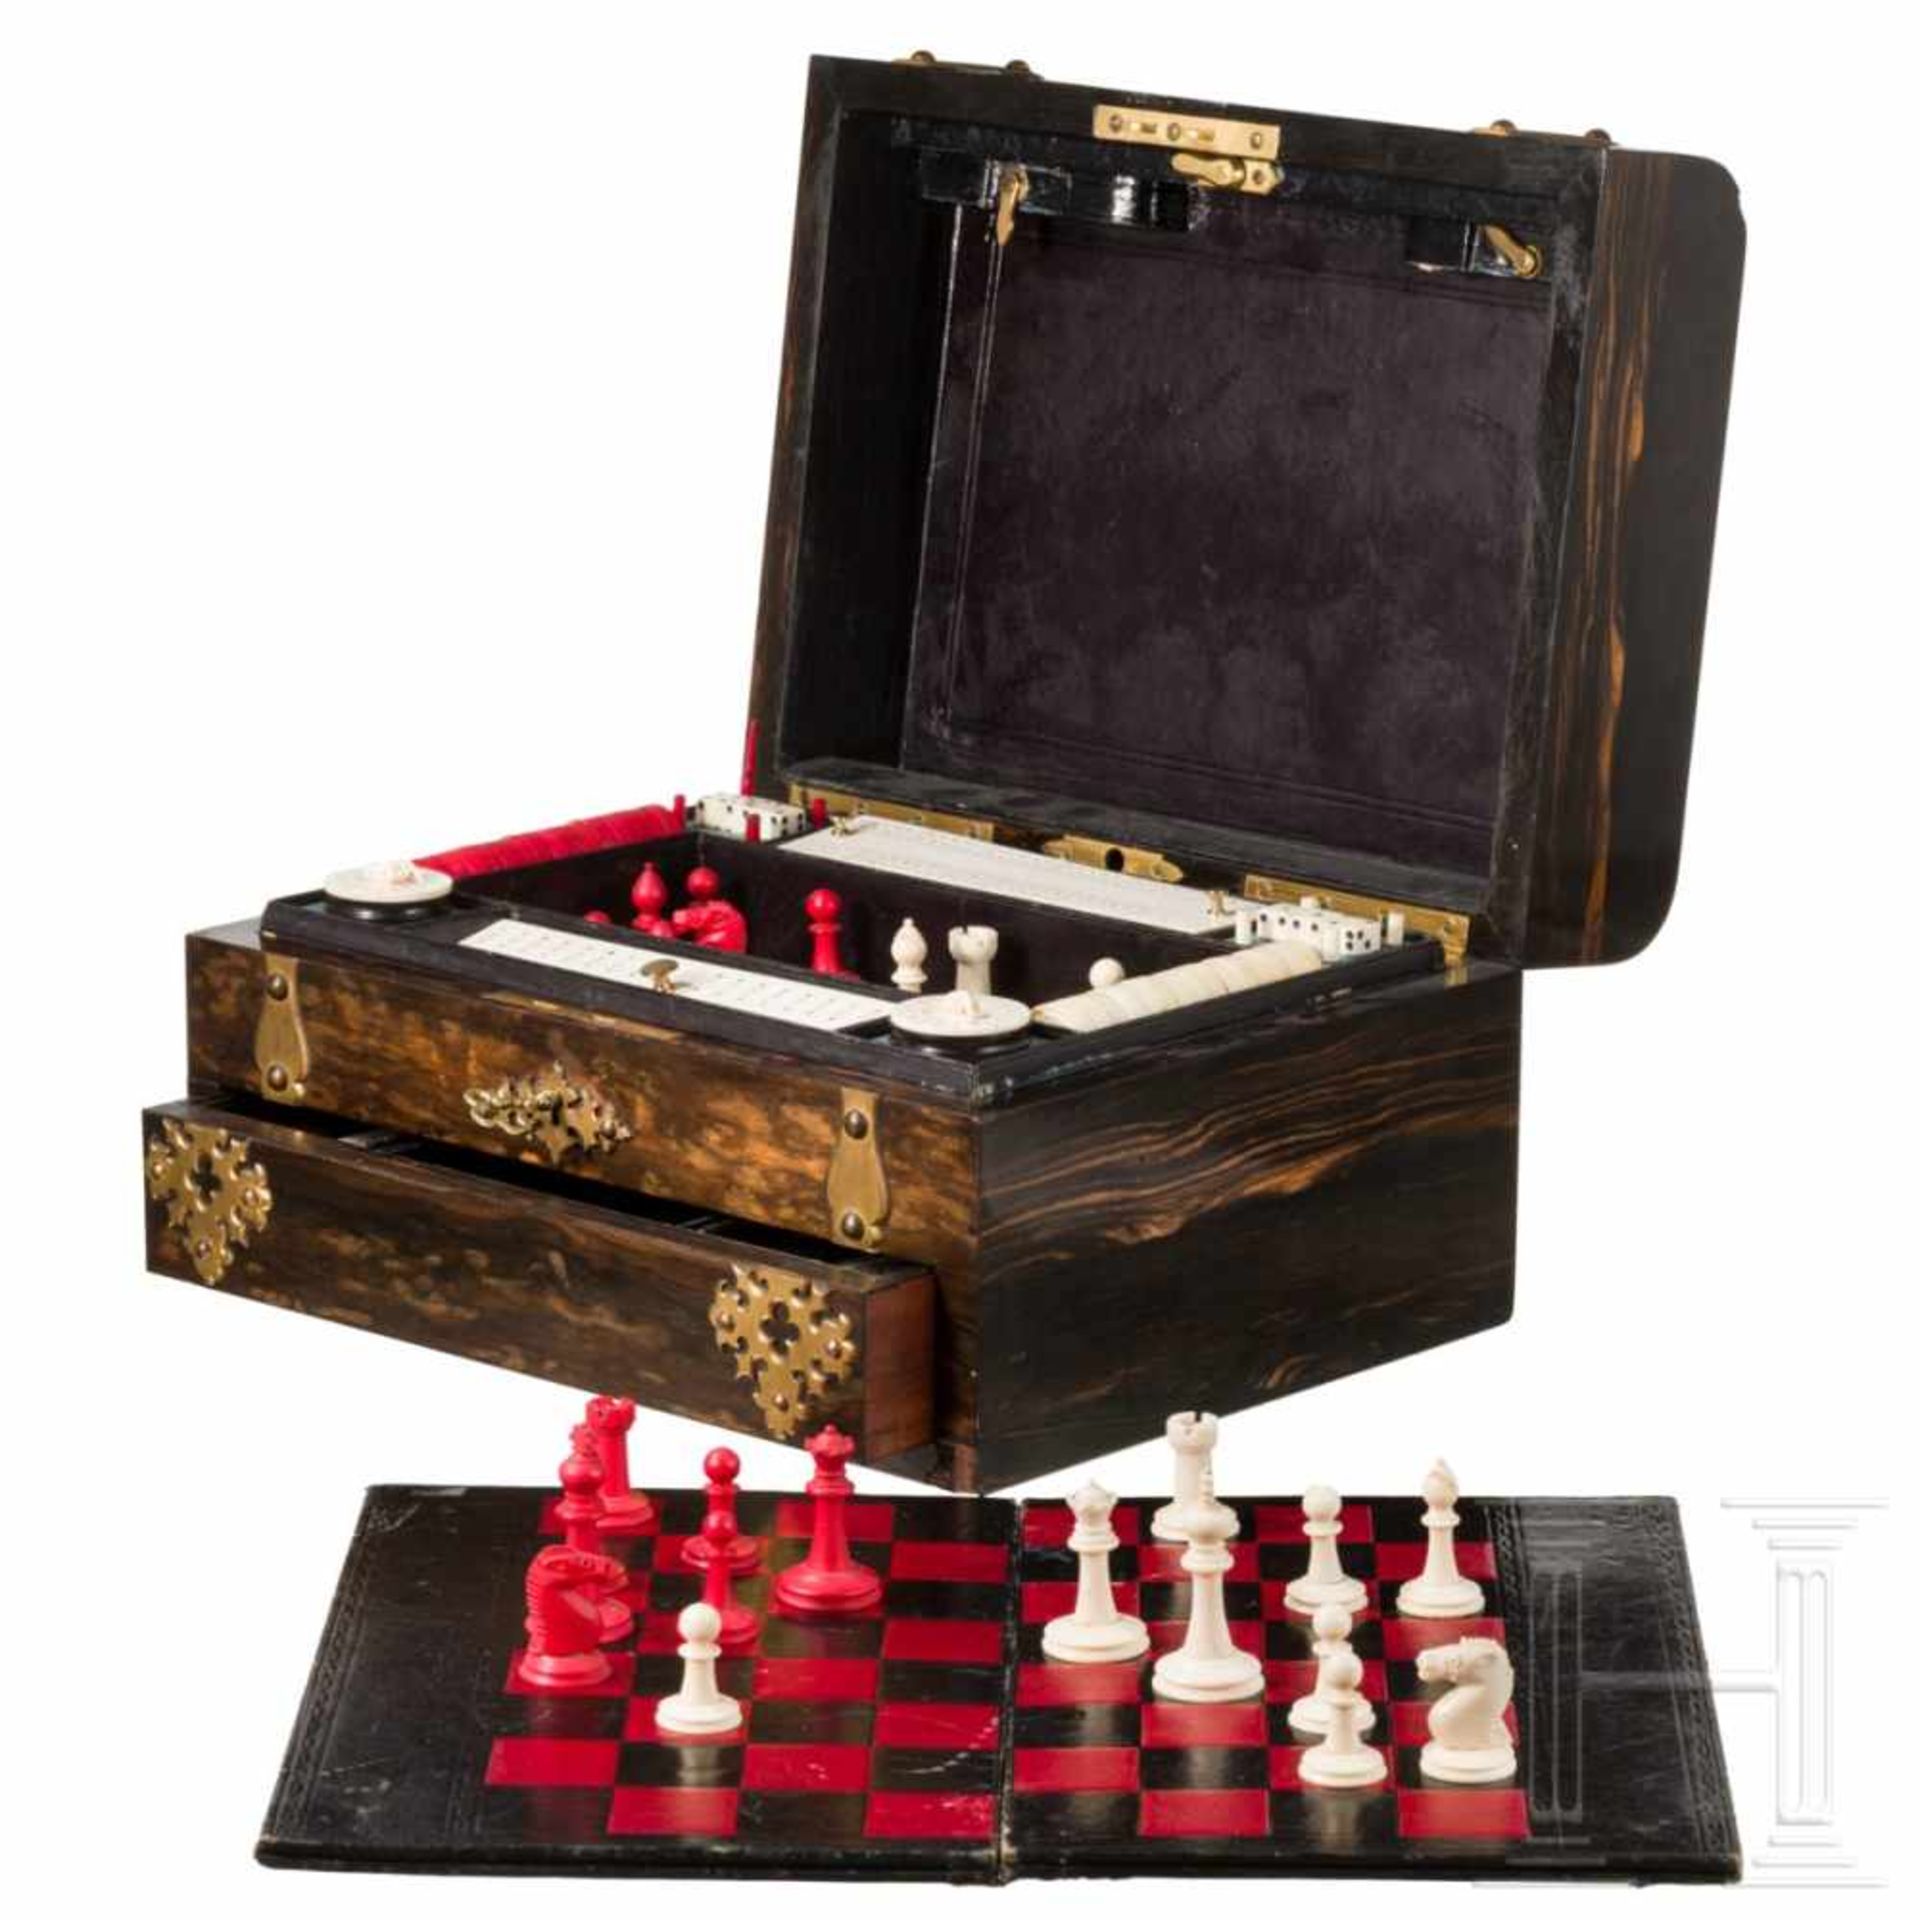 A rare English games compendium belonging to the Krupp family, London, late 19th centuryThe - Bild 2 aus 4